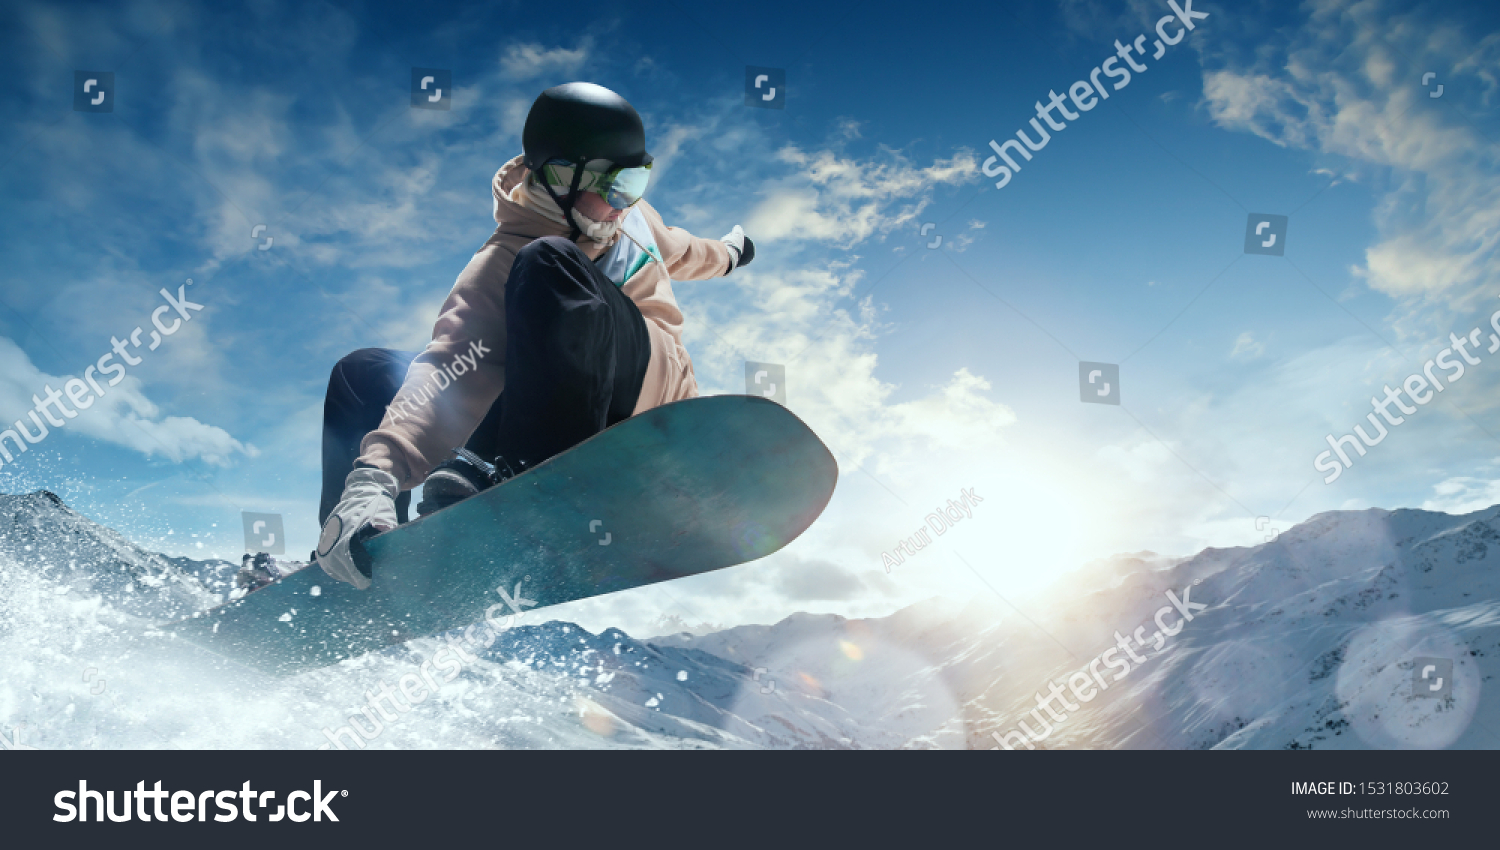 Snowboarder in action. Extreme winter sports. #1531803602